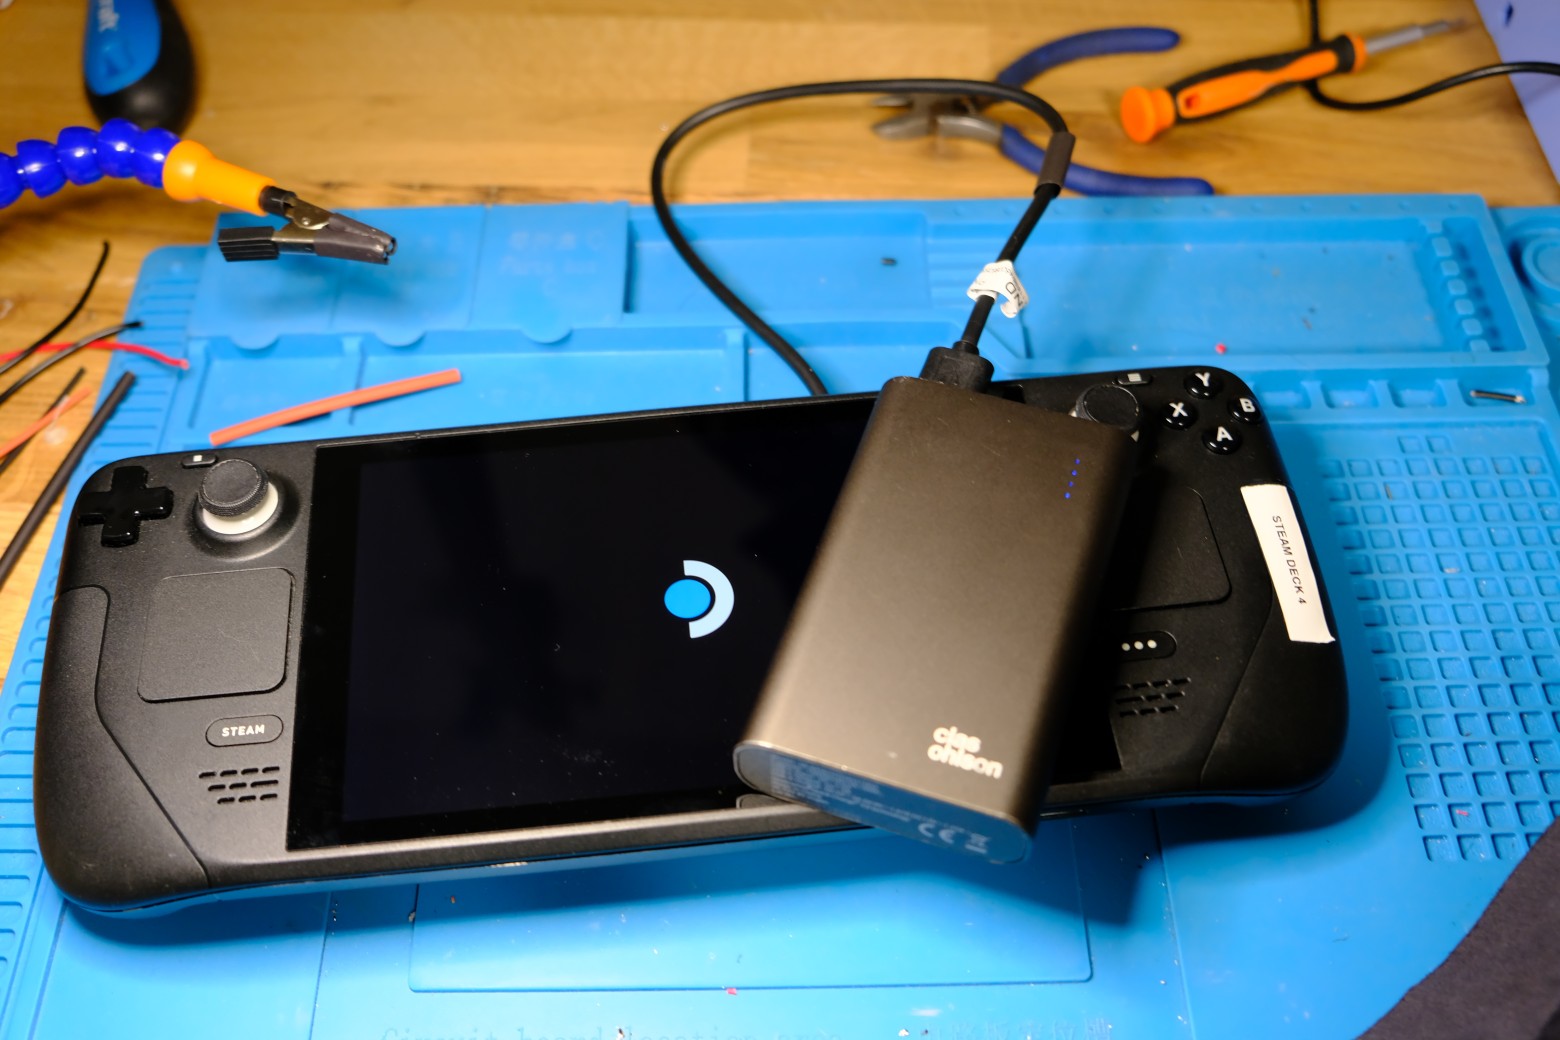 Test using a power bank that the machine can turn on when the PWR_GOOD signal is present, and turns off when missing